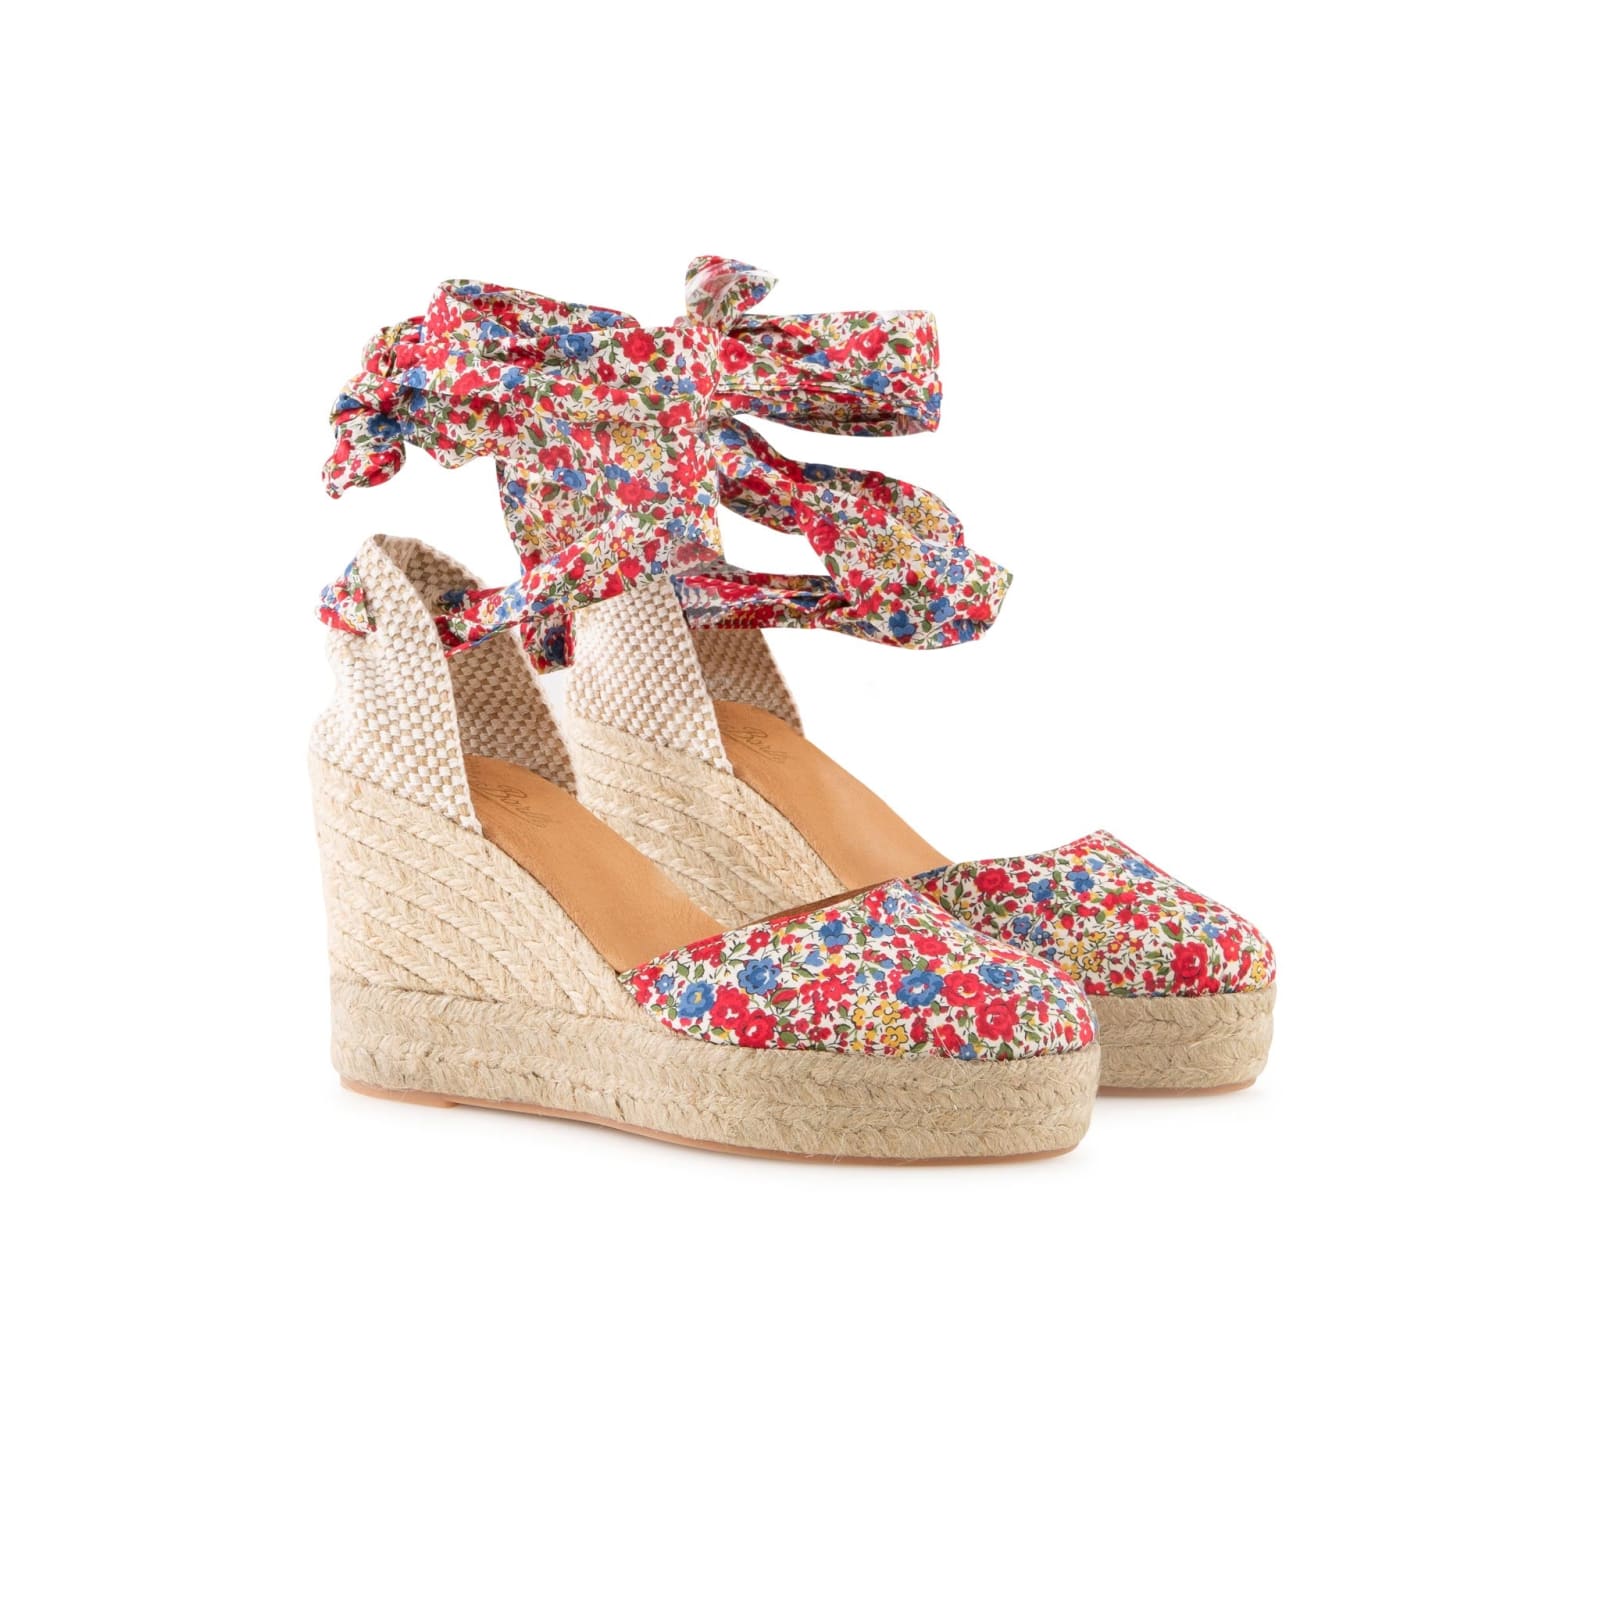 Espadrillas With High Wedge And Ankle Lace